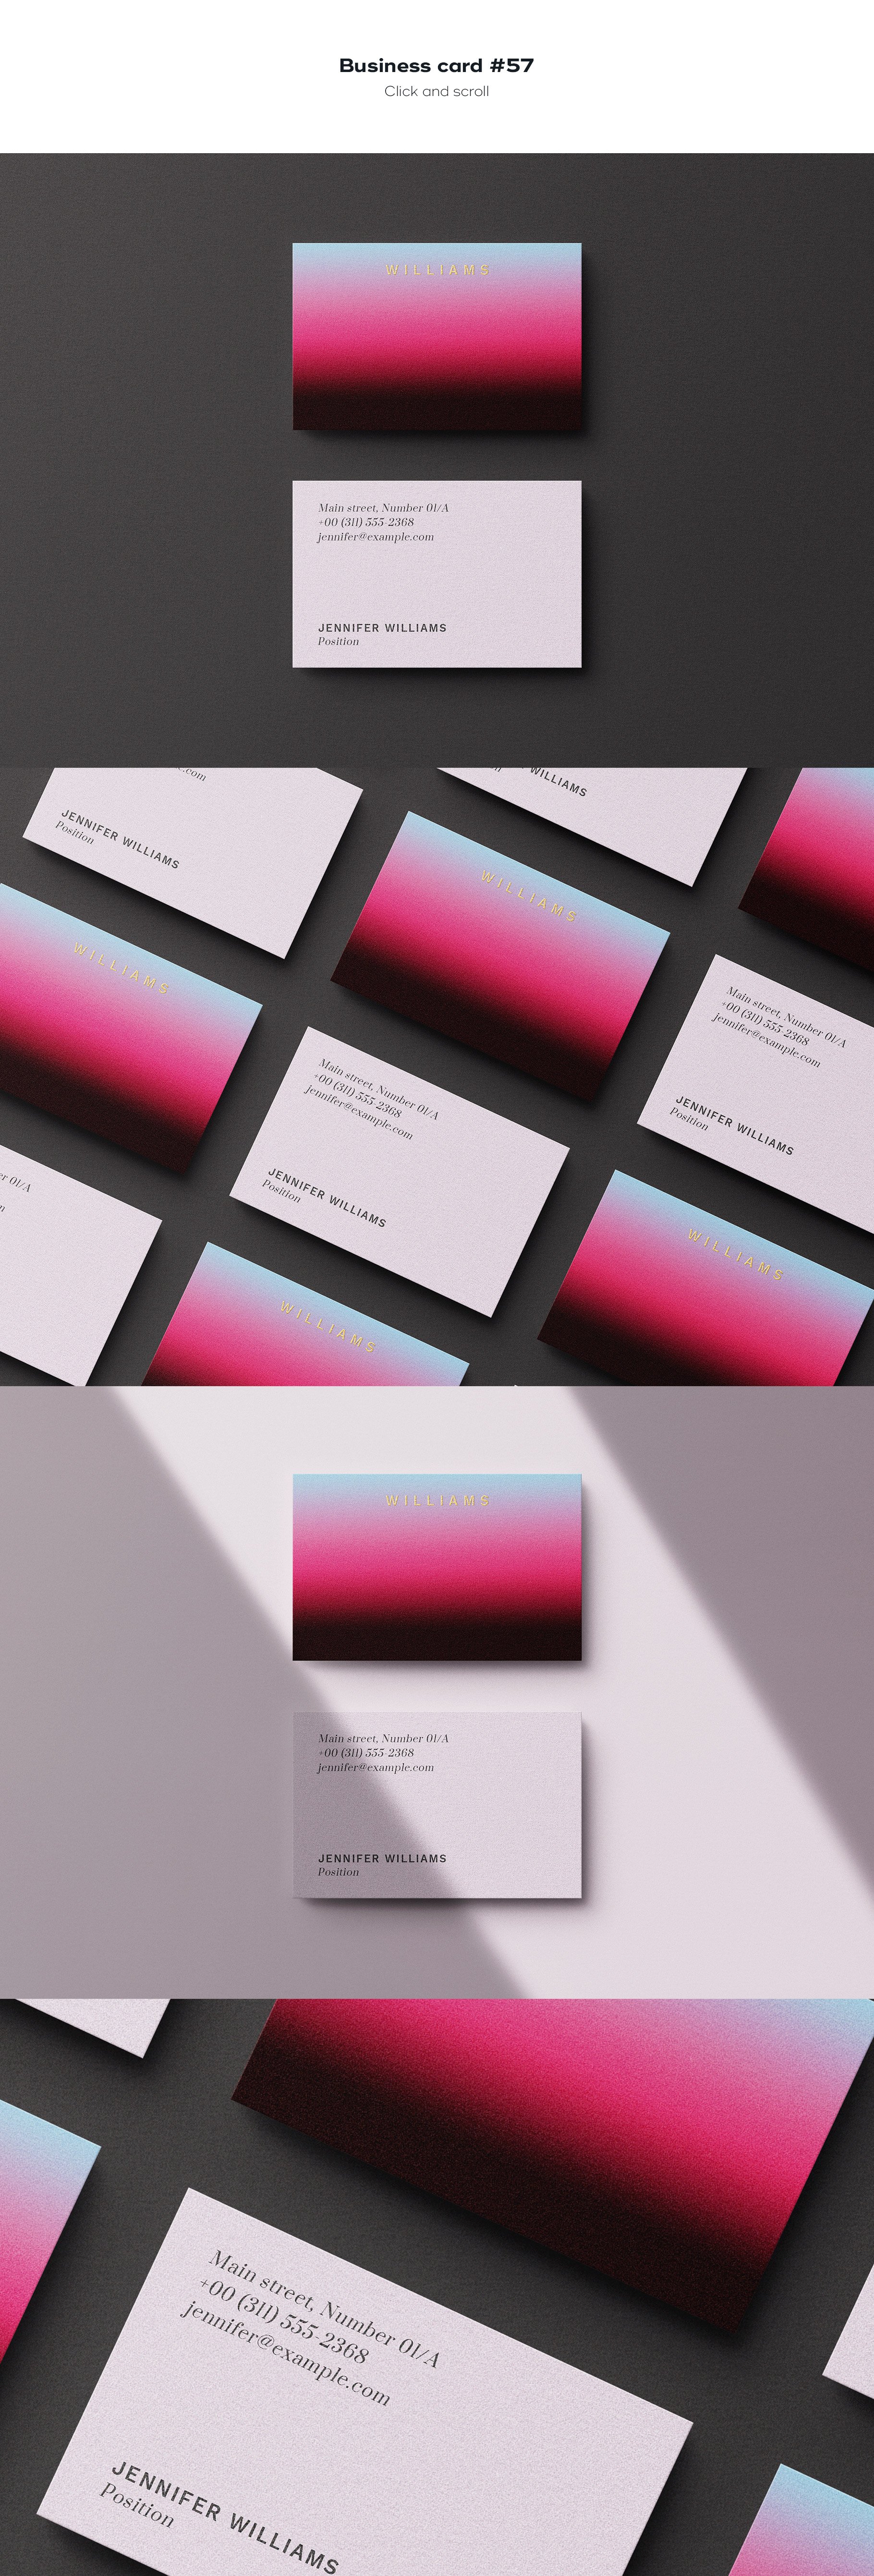 business card 57 741